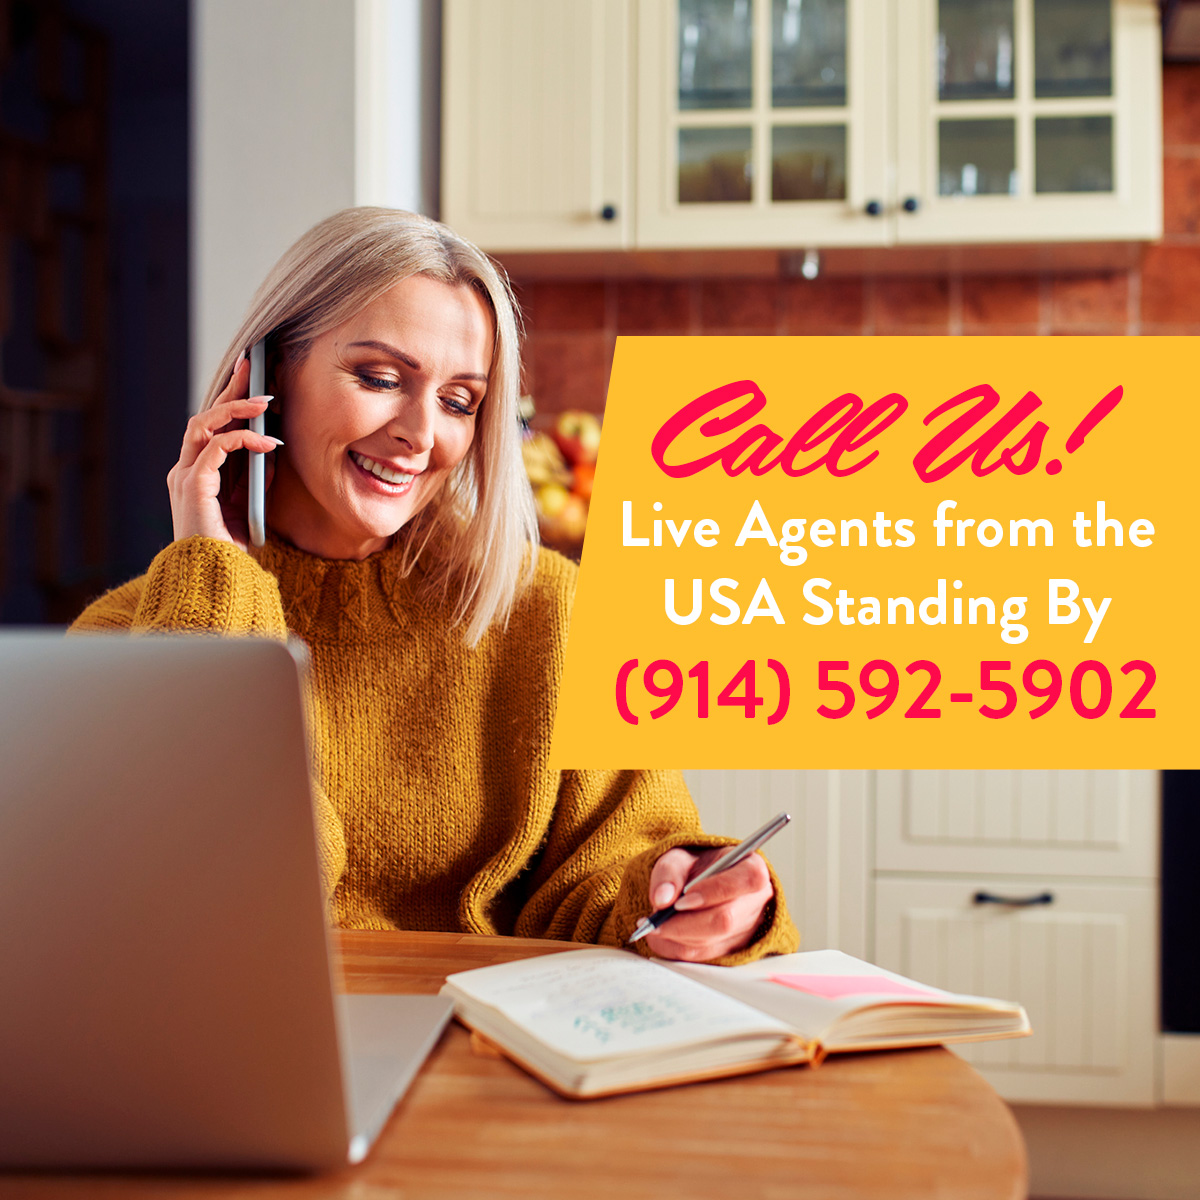 Call Us! Live Agents from the USA Standing By